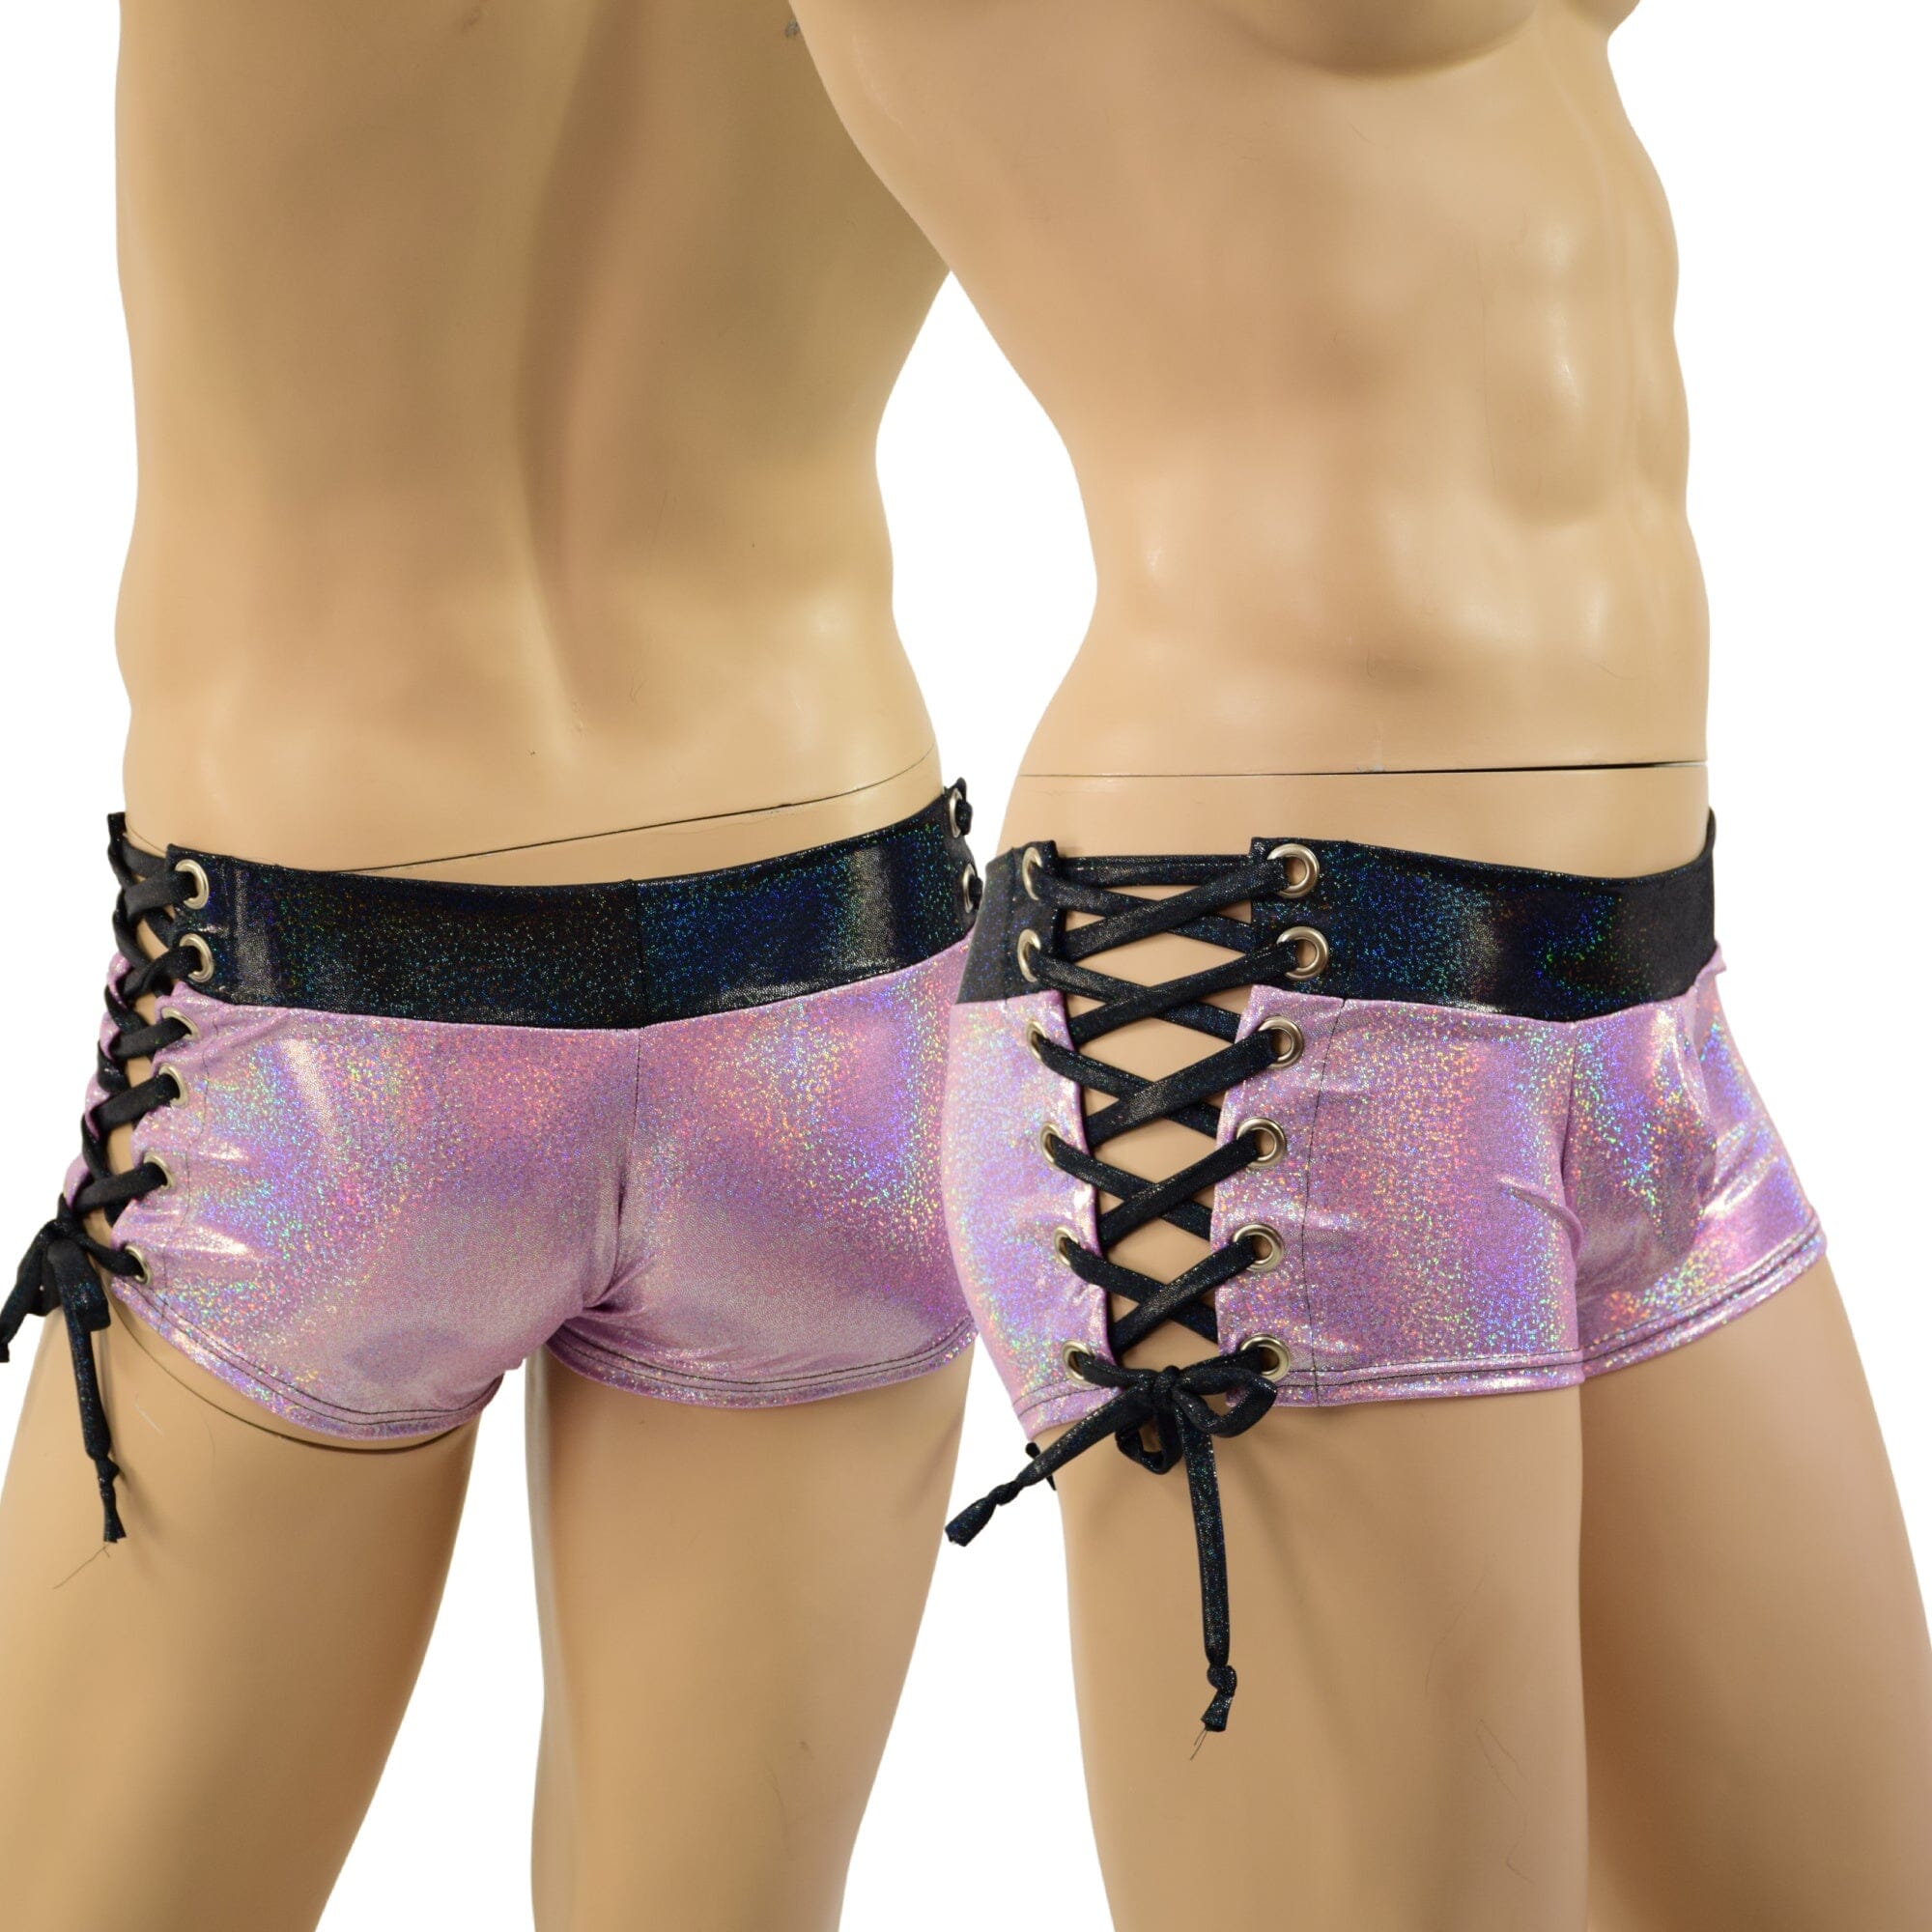 Mens Lowrise Aruba Lace Up Shorts in UNLINED Sheer Mesh